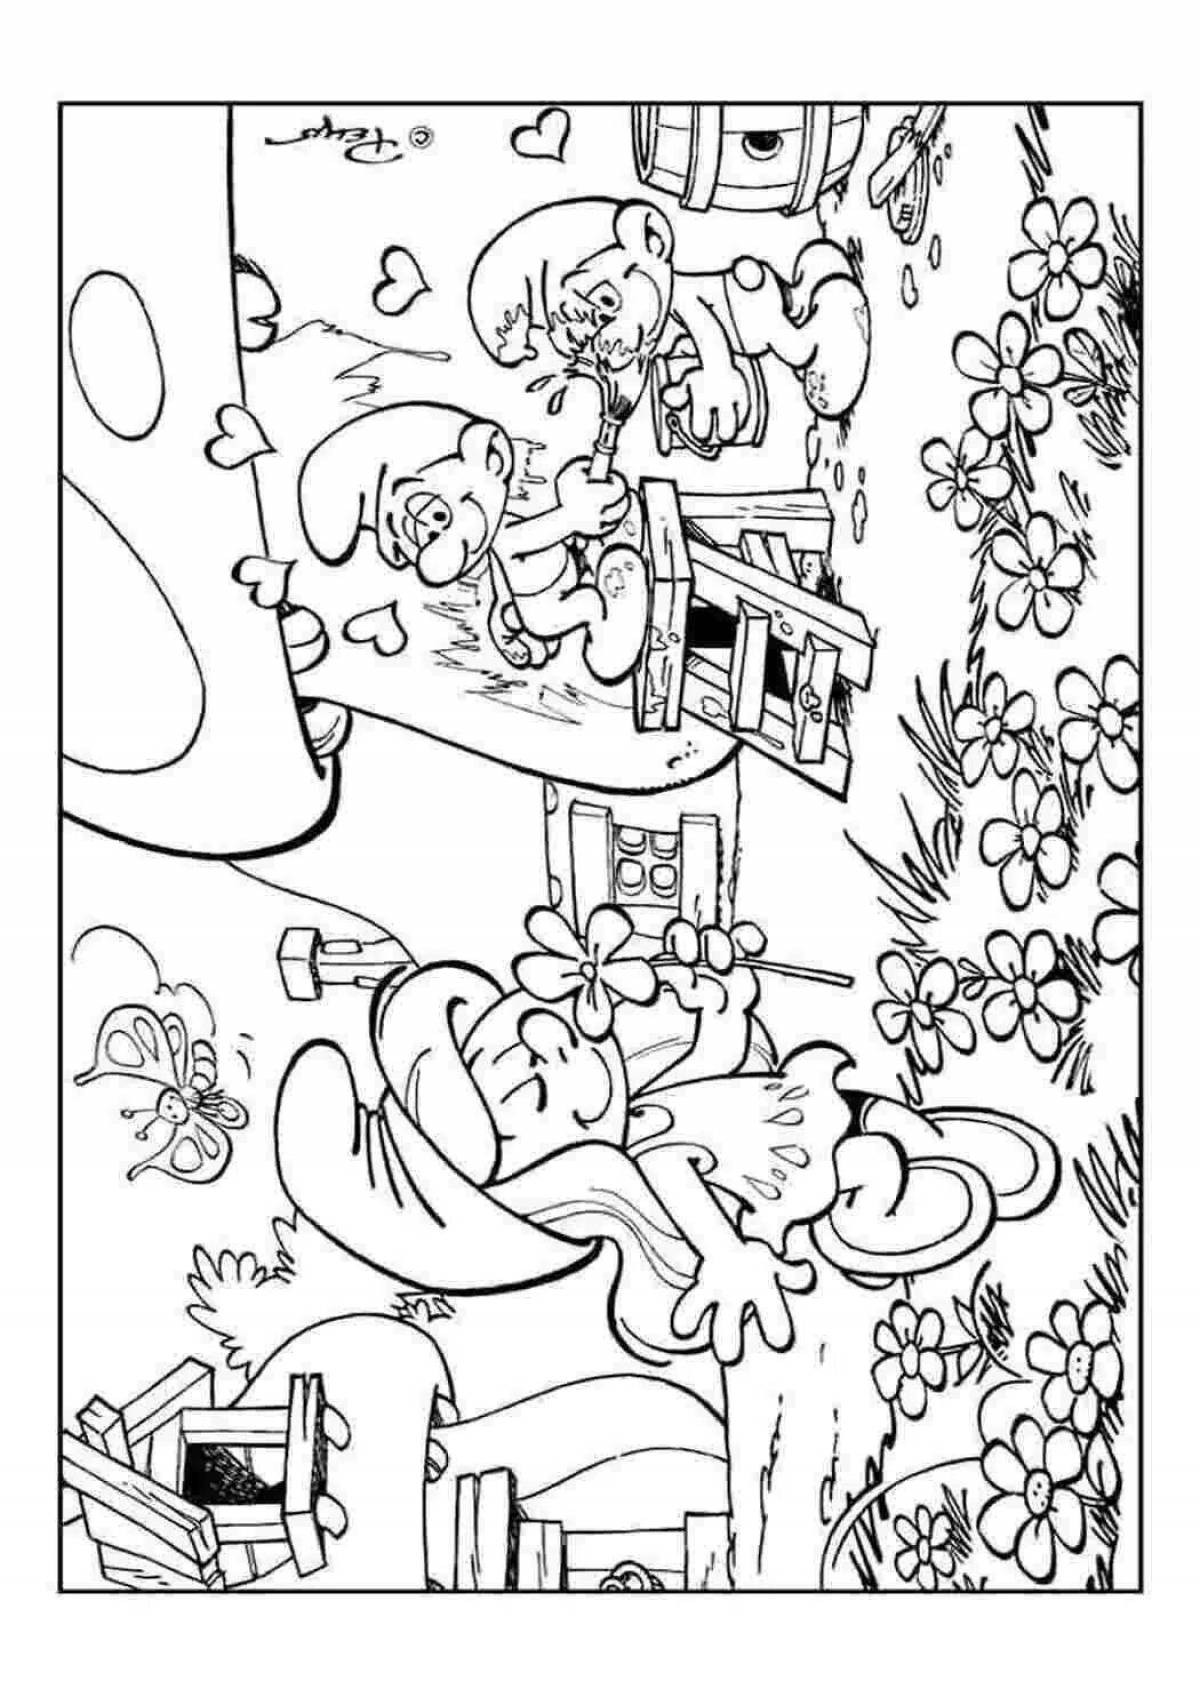 Playful tvhead coloring page